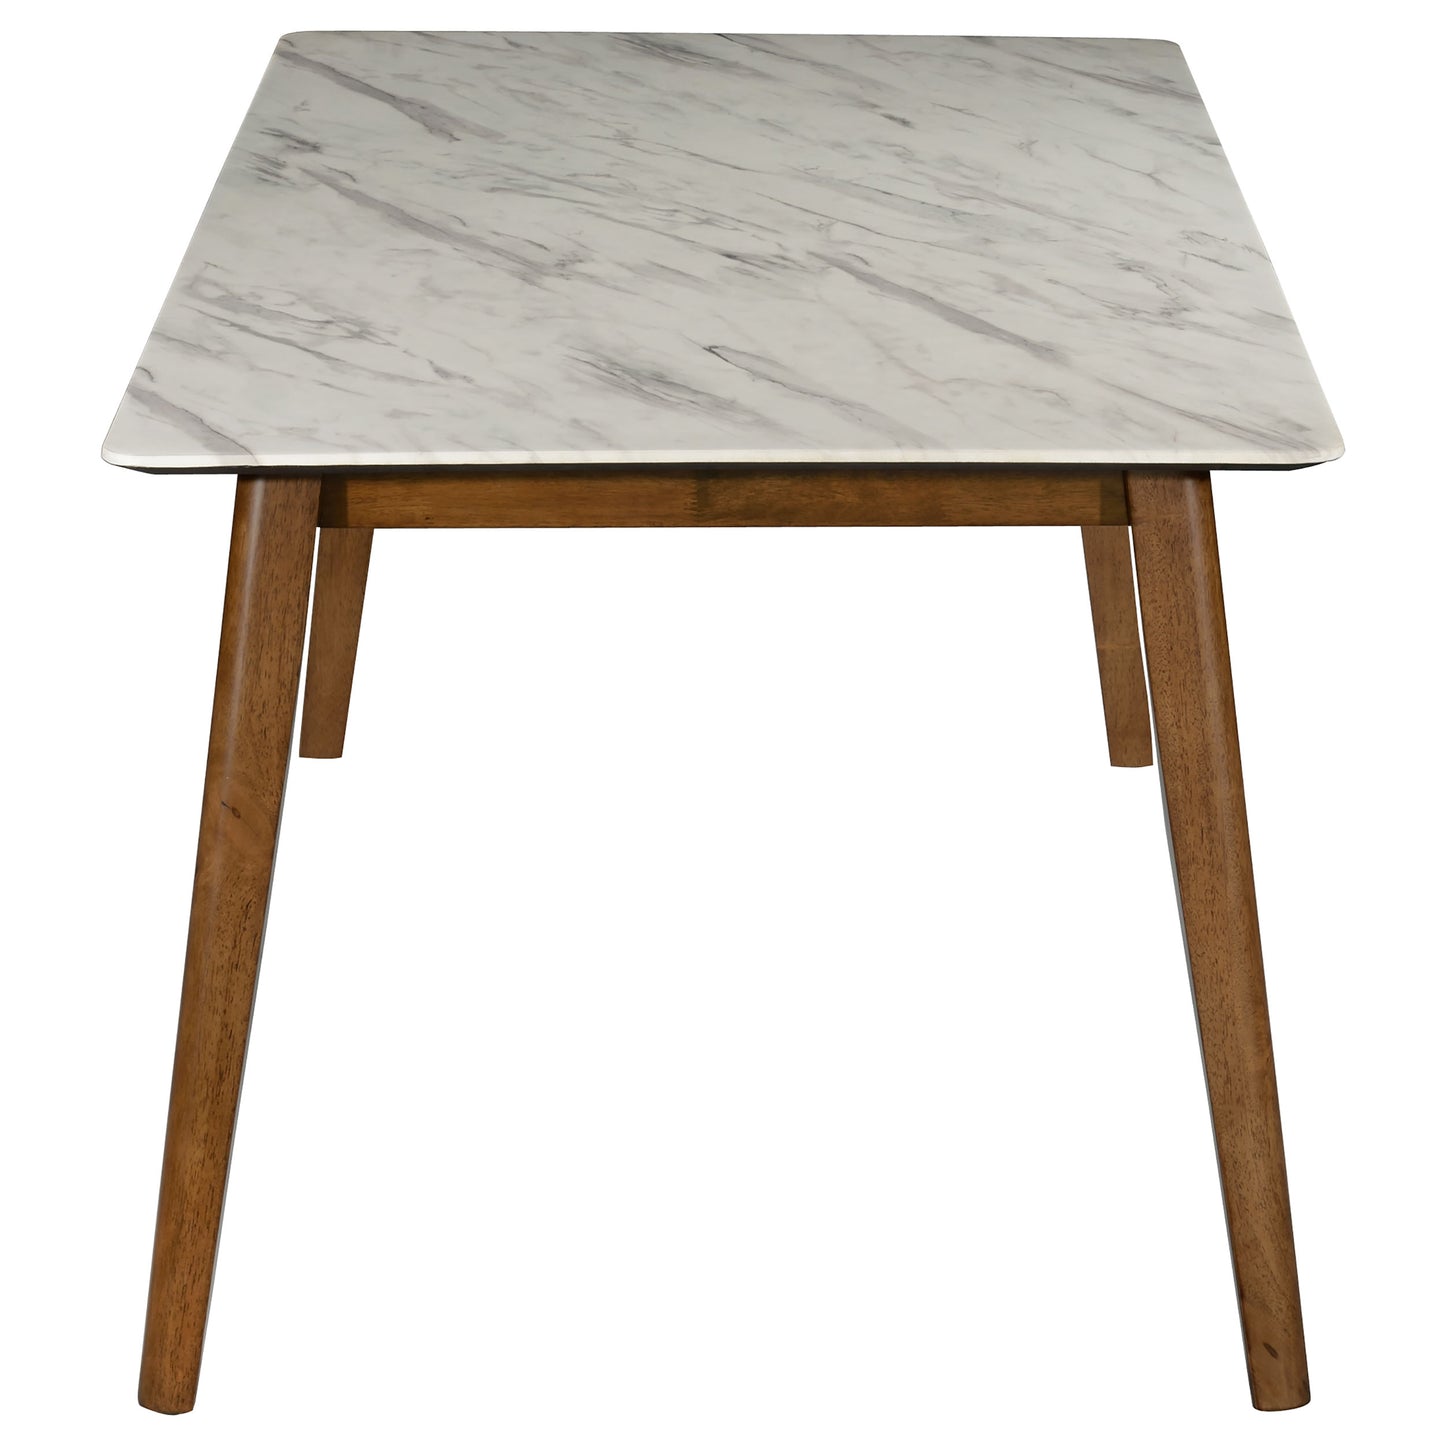 Everett 5-piece Faux Marble Top Dining Table Natural Walnut and Grey